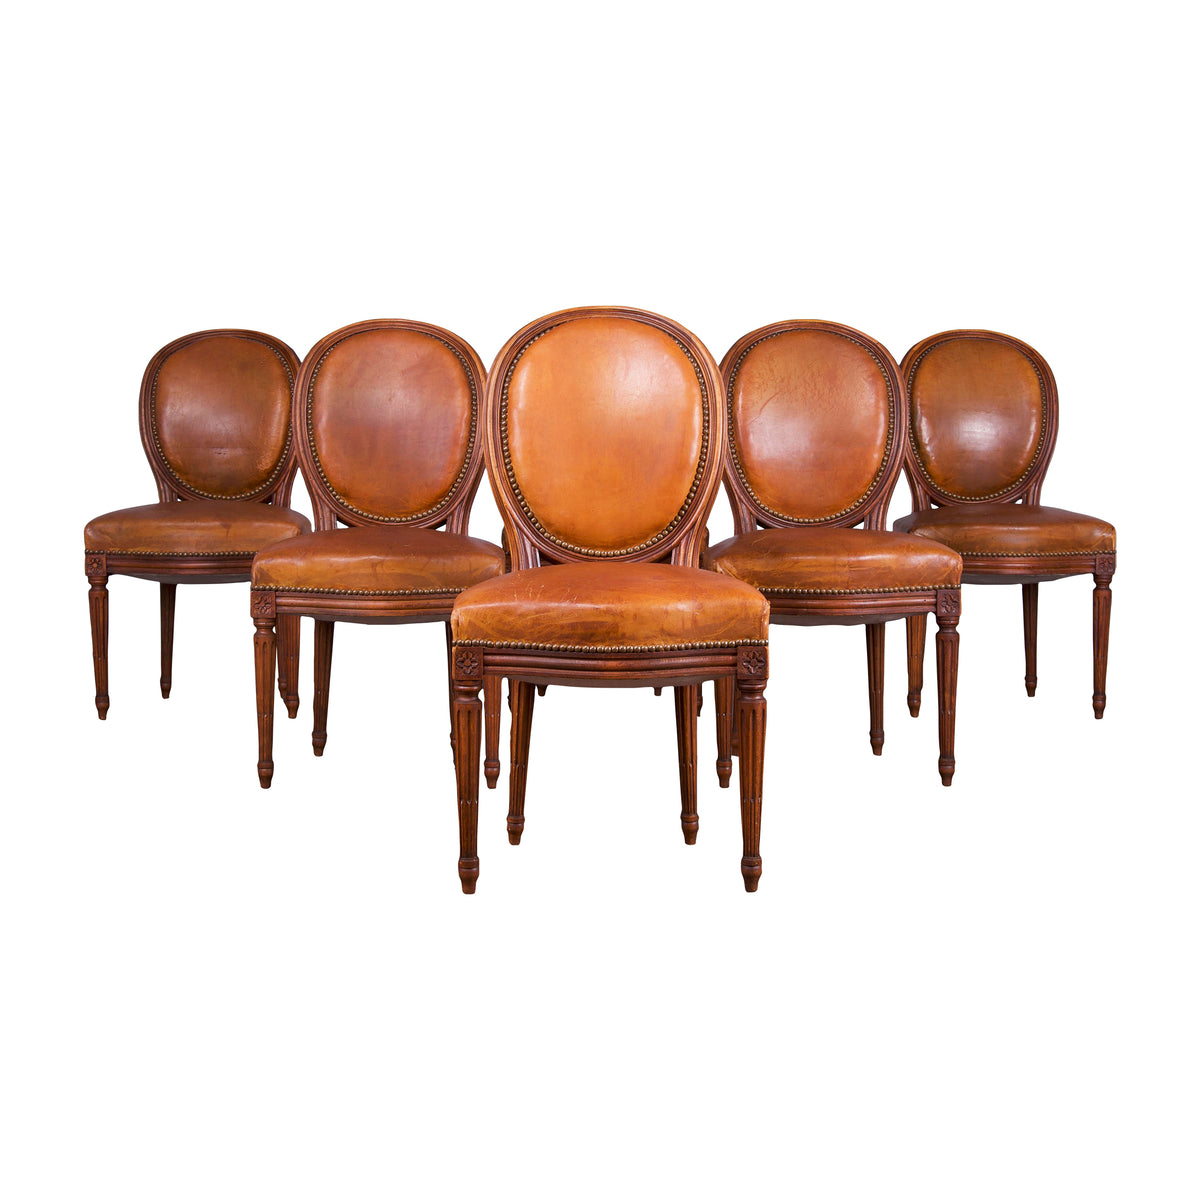 Antique French Louis XVI Maple Dining Chairs W/ Original Brown Leather - Set of 6